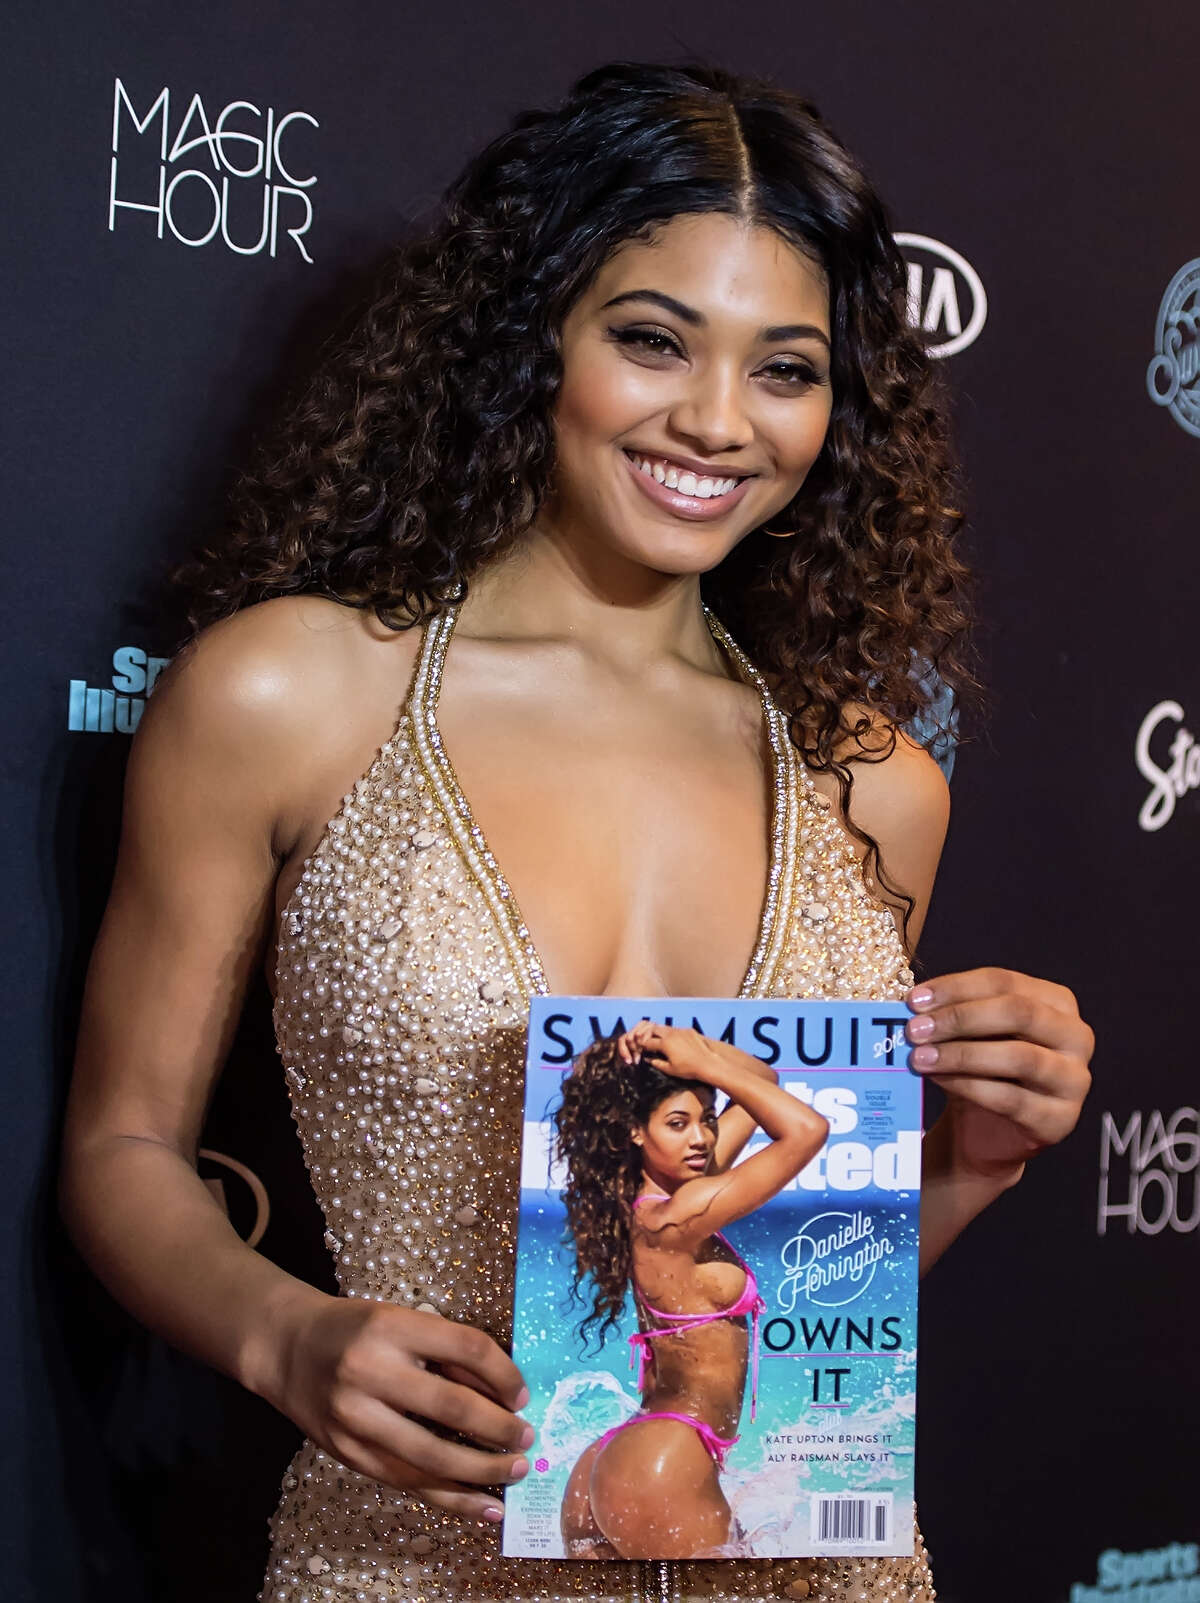 2018 Sports Illustrated Swimsuit cover model Danielle Herrington attends the 2018 Sports Illustrated Swimsuit Issue Launch Celebration at Magic Hour at Moxy Times Square on February 14, 2018 in New York City.Scroll ahead to see more images from the 2018 Sports Illustrated swimsuit issue launch celebration. 